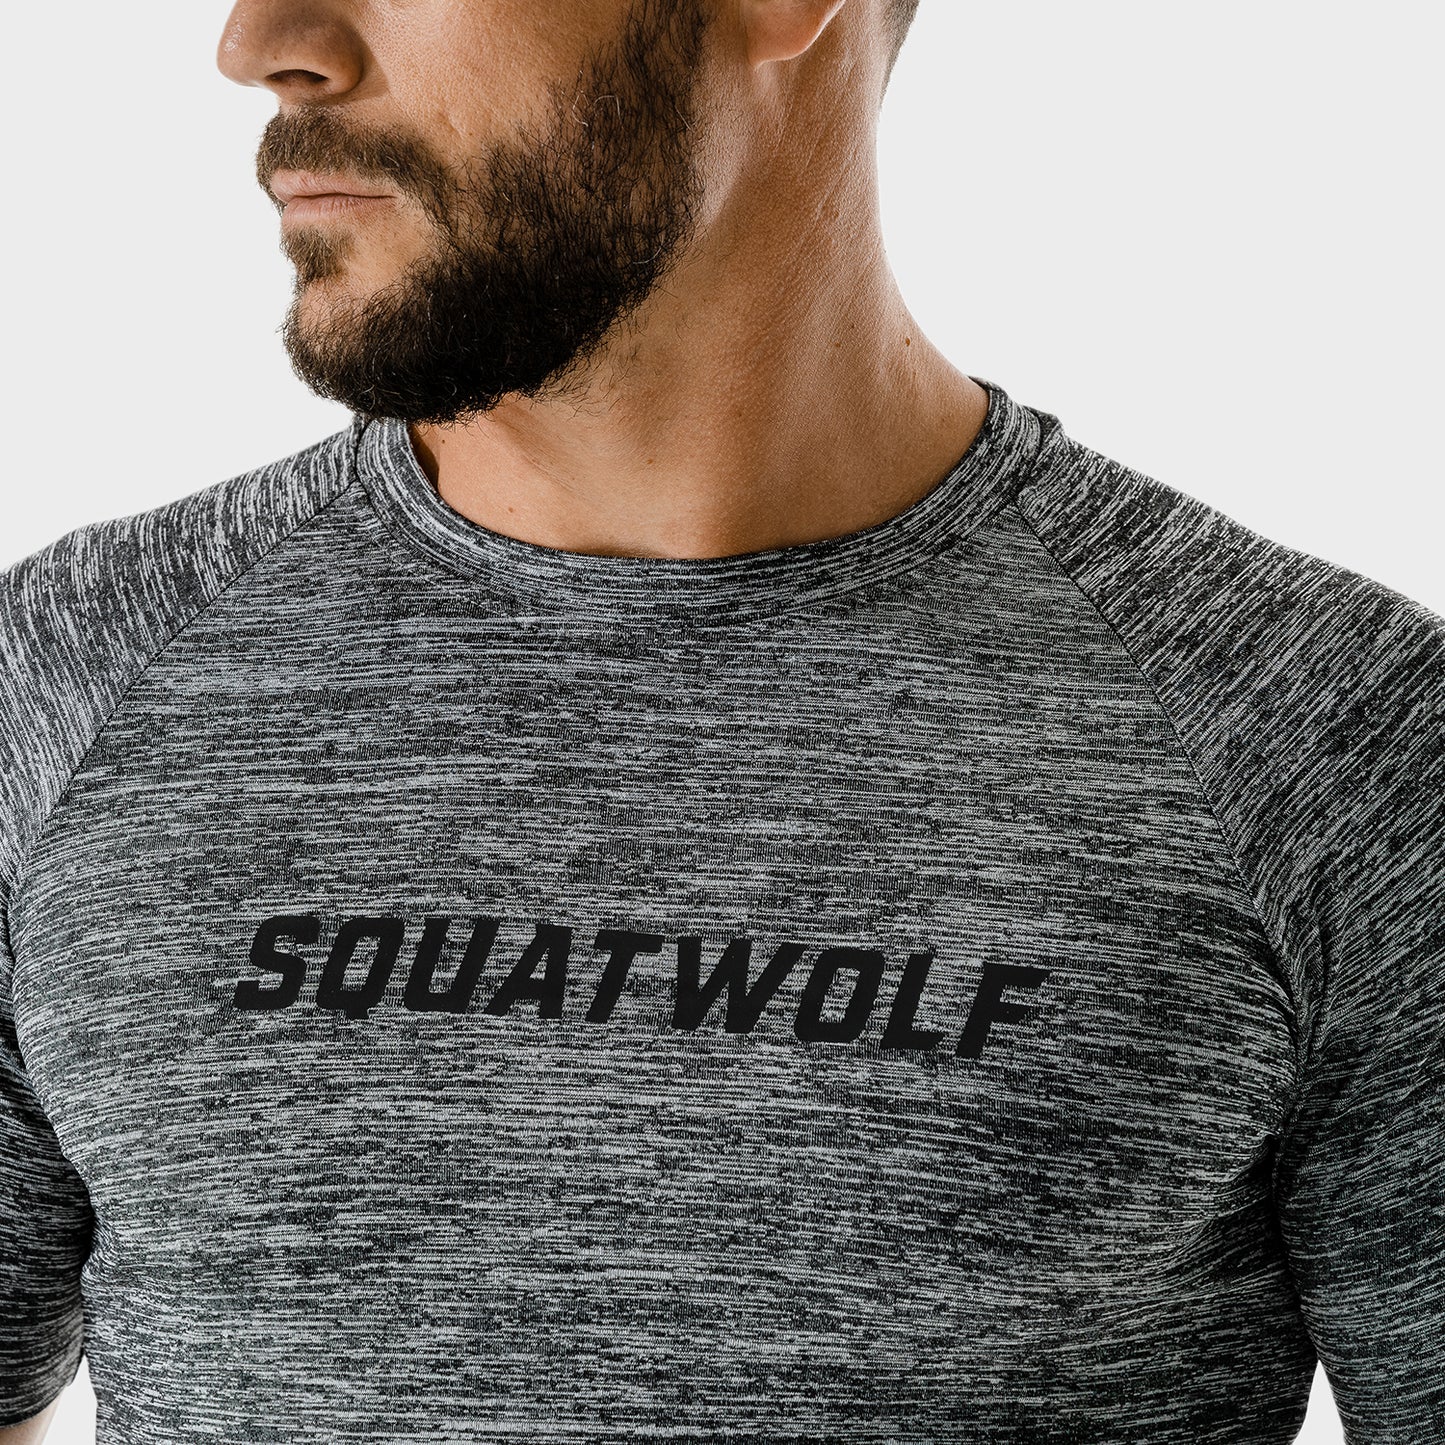 squatwolf-gym-t-shirt-code-logo-t-shirt-charcoal-marl-workout-clothes-for-men